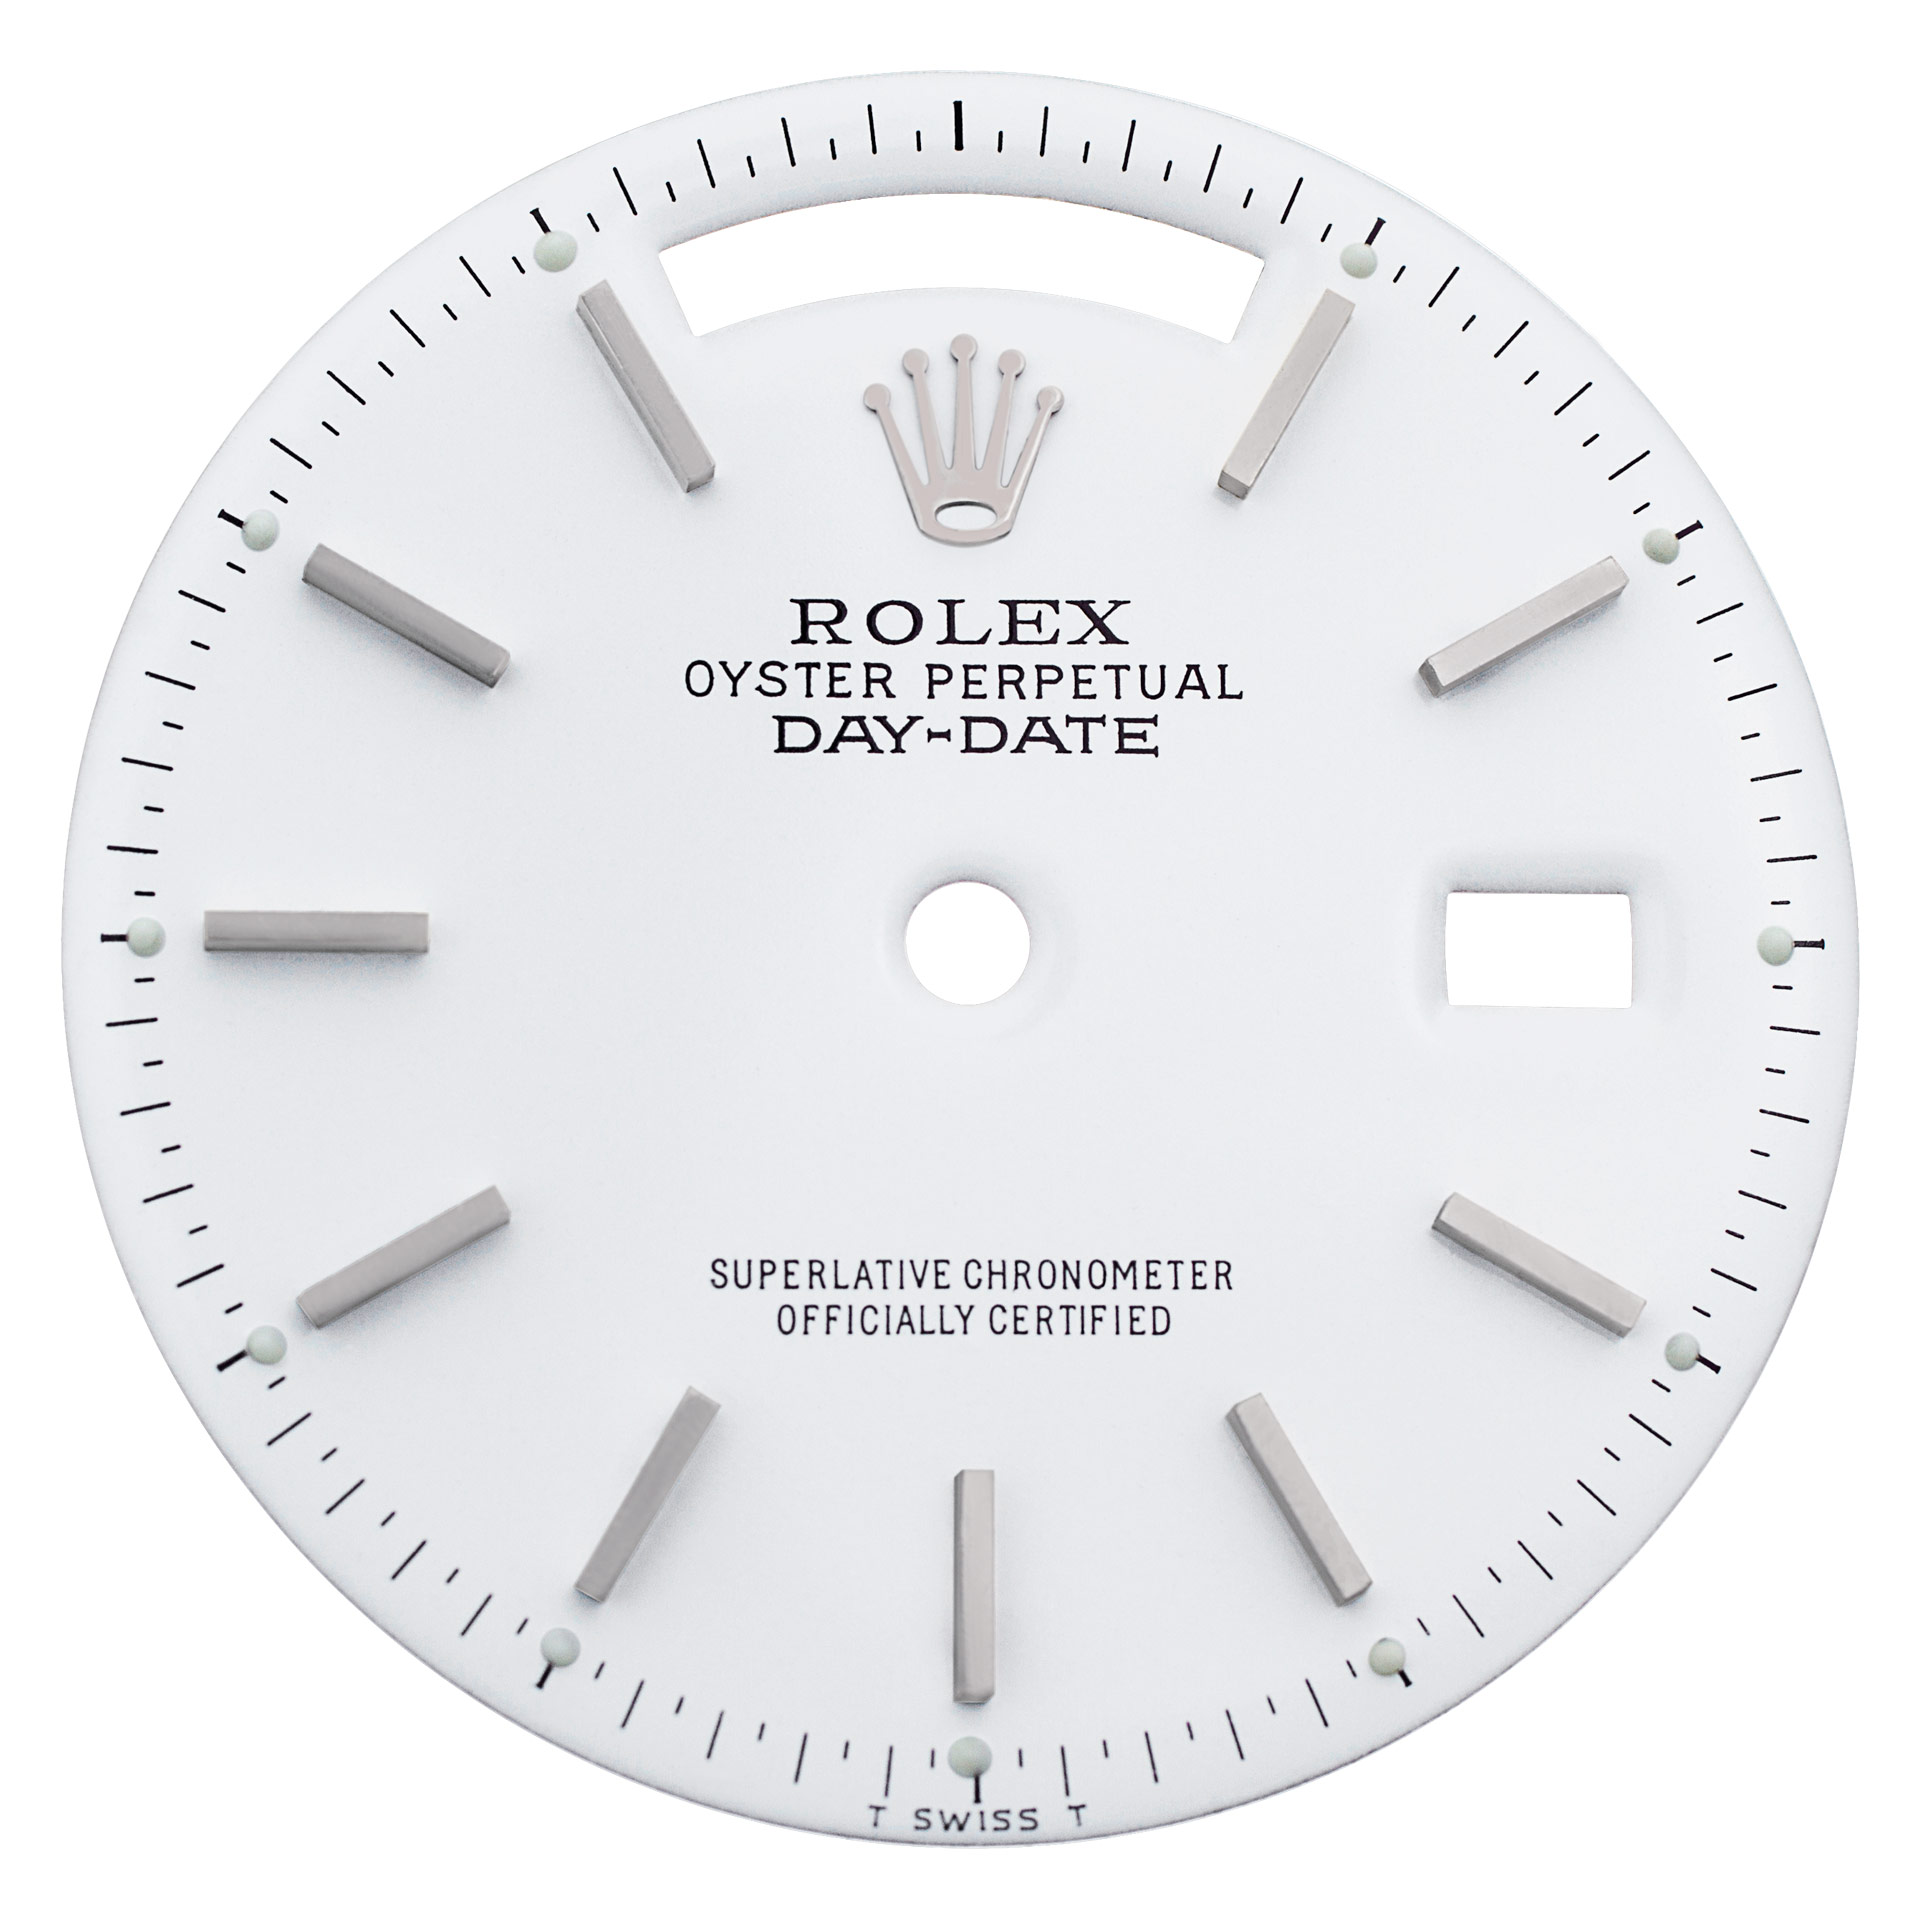 Rolex Day-date white stick dial image 1